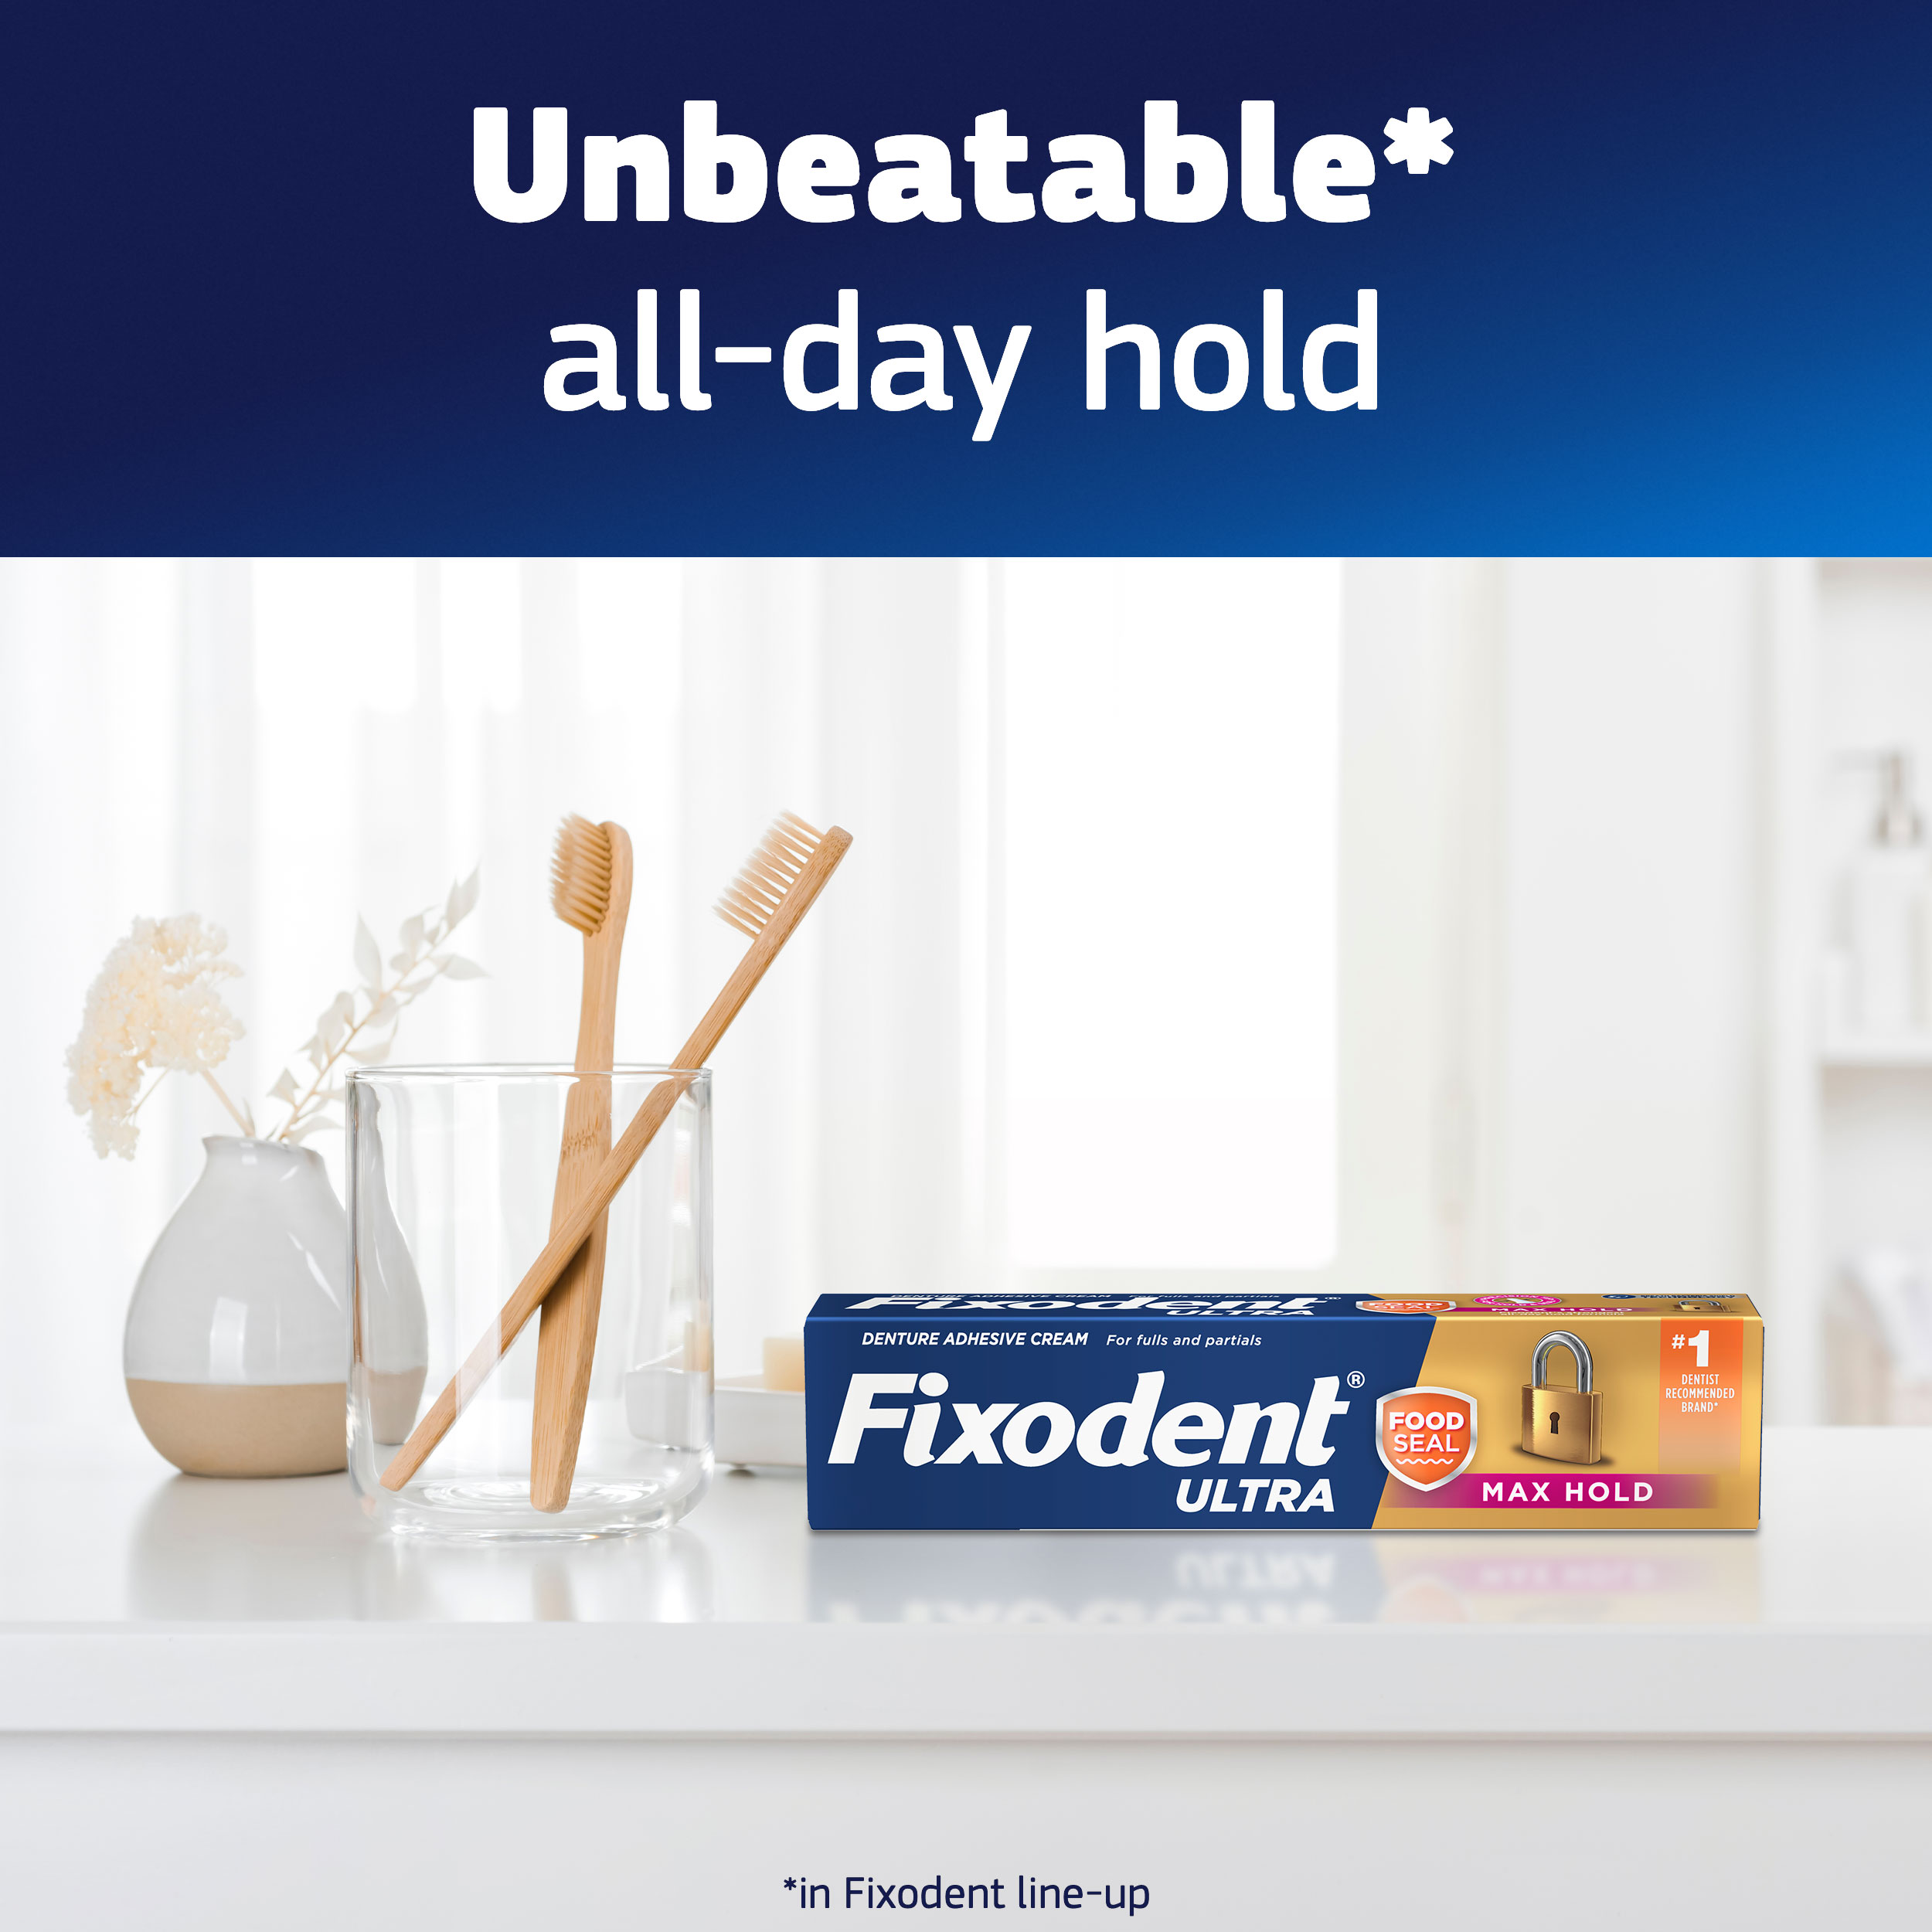  Fixodent Ultra Dual Power - Unbeatable all-day hold